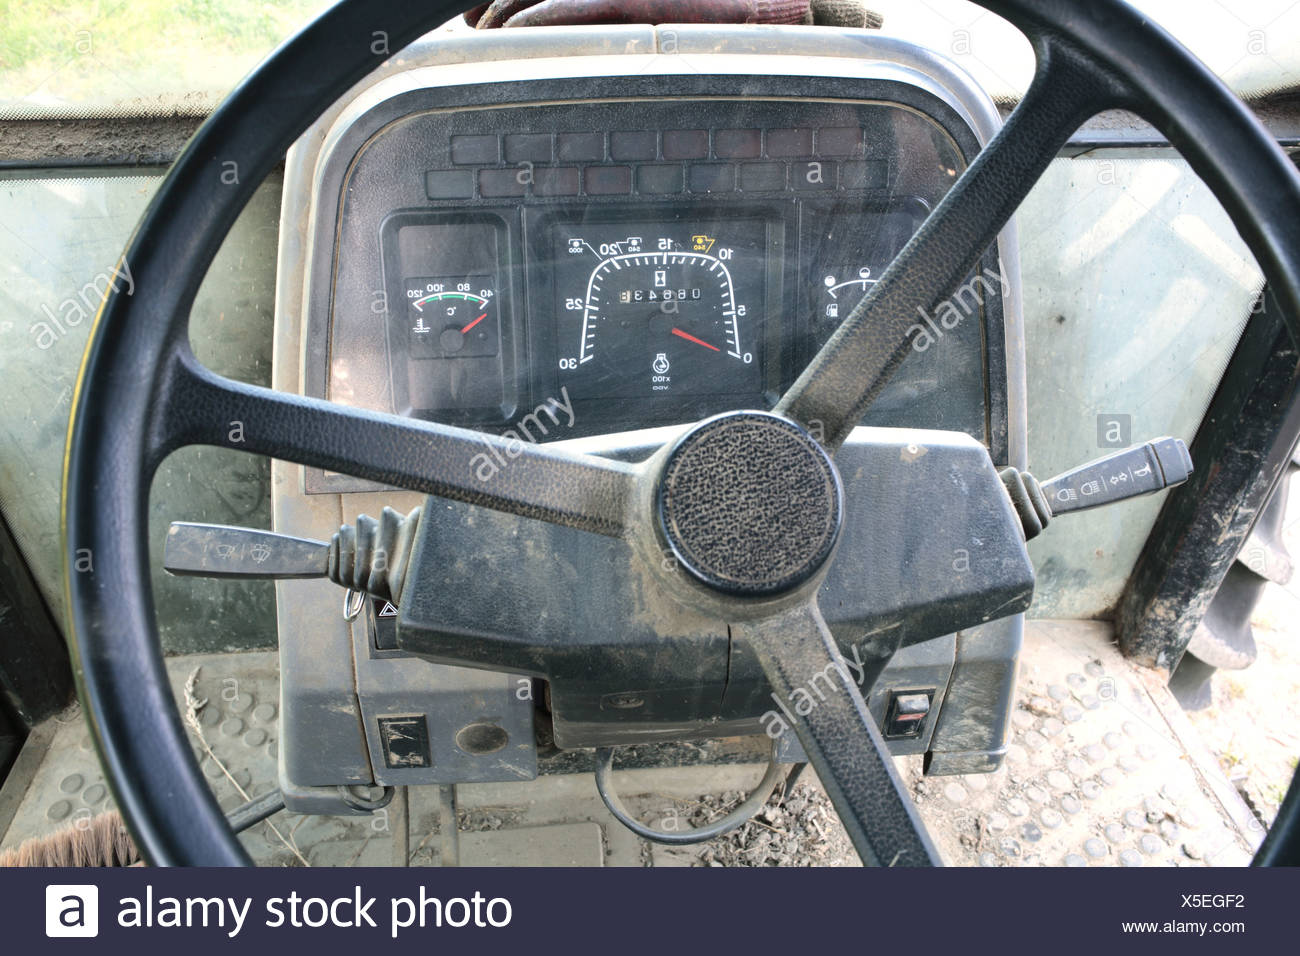 Farm Farming Europe European Britain British Ford Tractor Agriculture Agricultural Machine Machinery Part Control Controlling Stock Photo Alamy